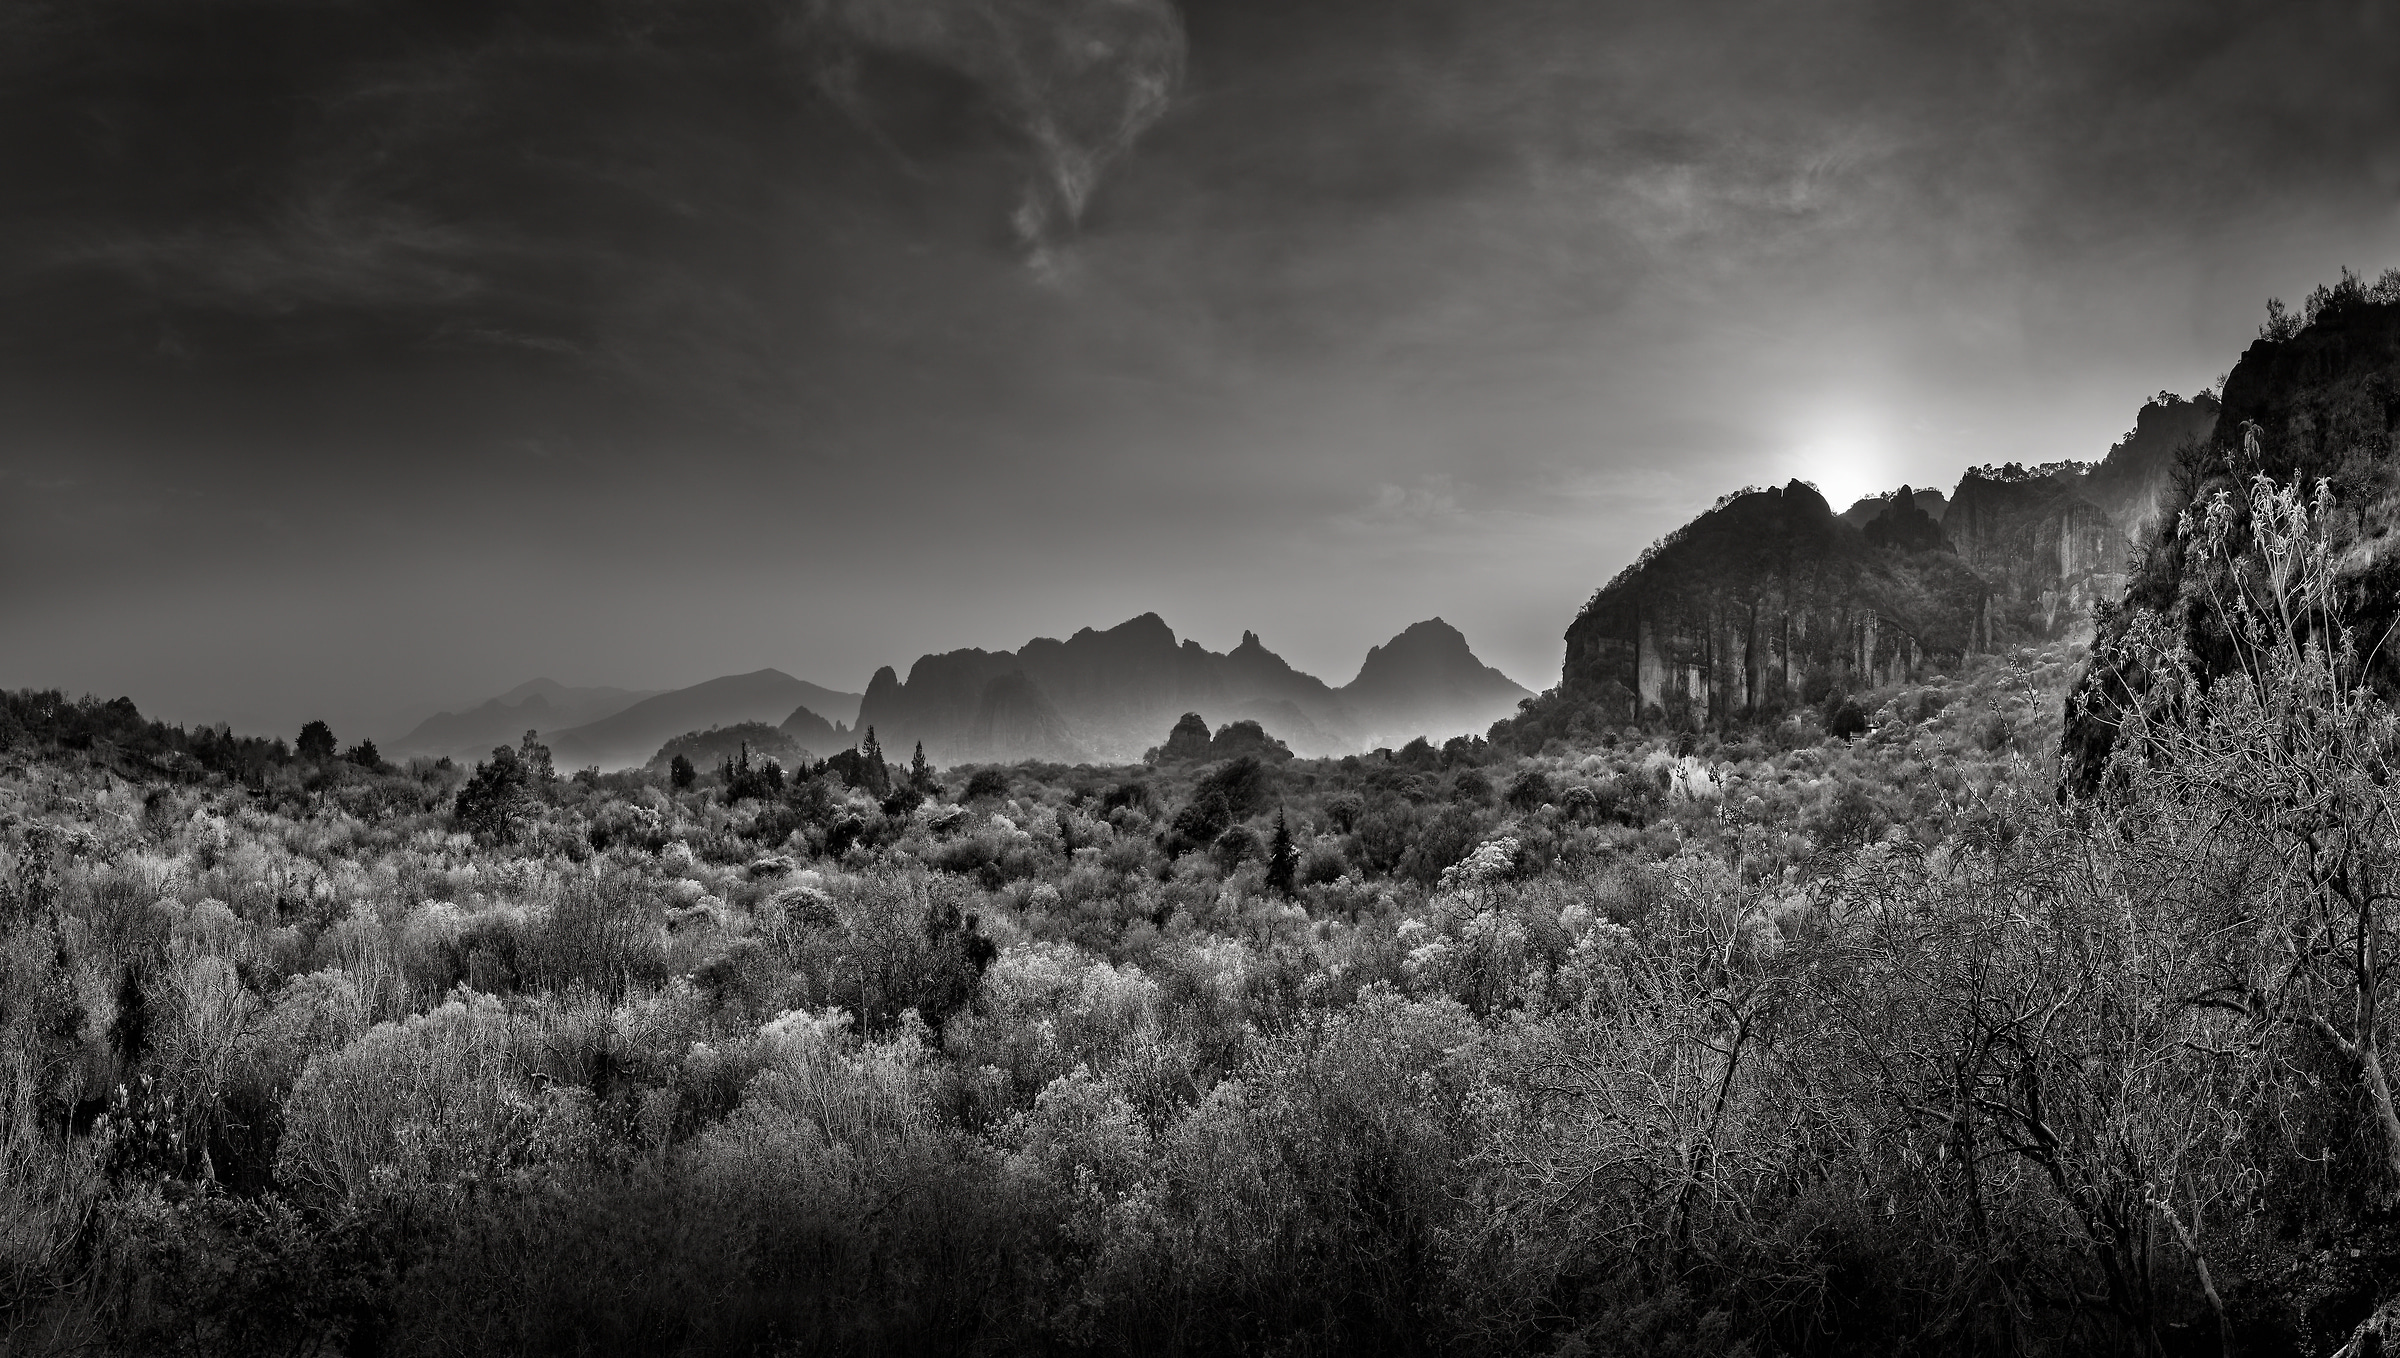 436 megapixels! A very high resolution, black & white VAST photo print of a Mexico landscape; photograph created by Peter Rodger in Tapoztlán, Mexico